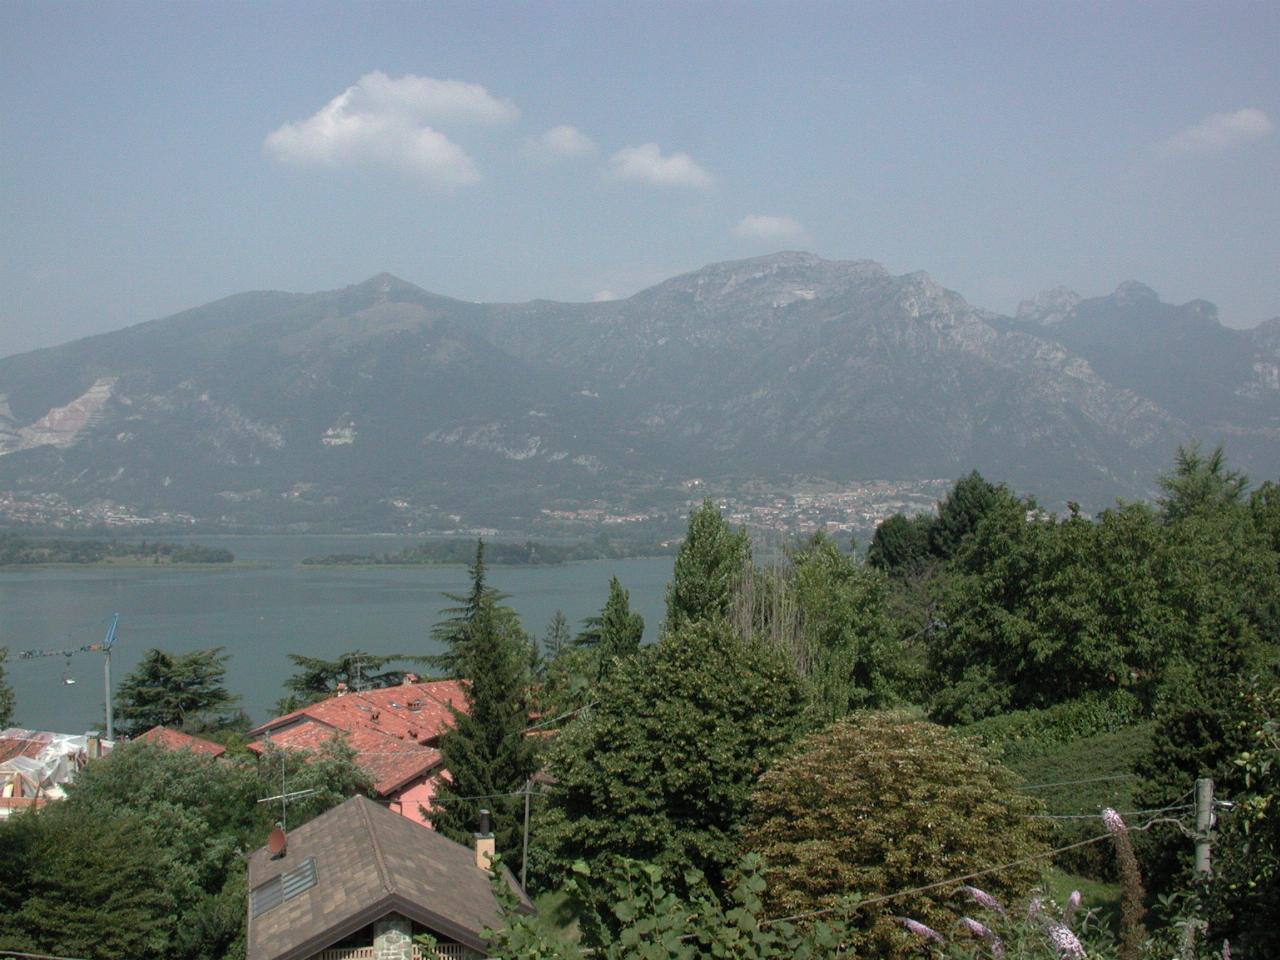 Lake Lecco, from the south, showing the town of Lecco across the lake